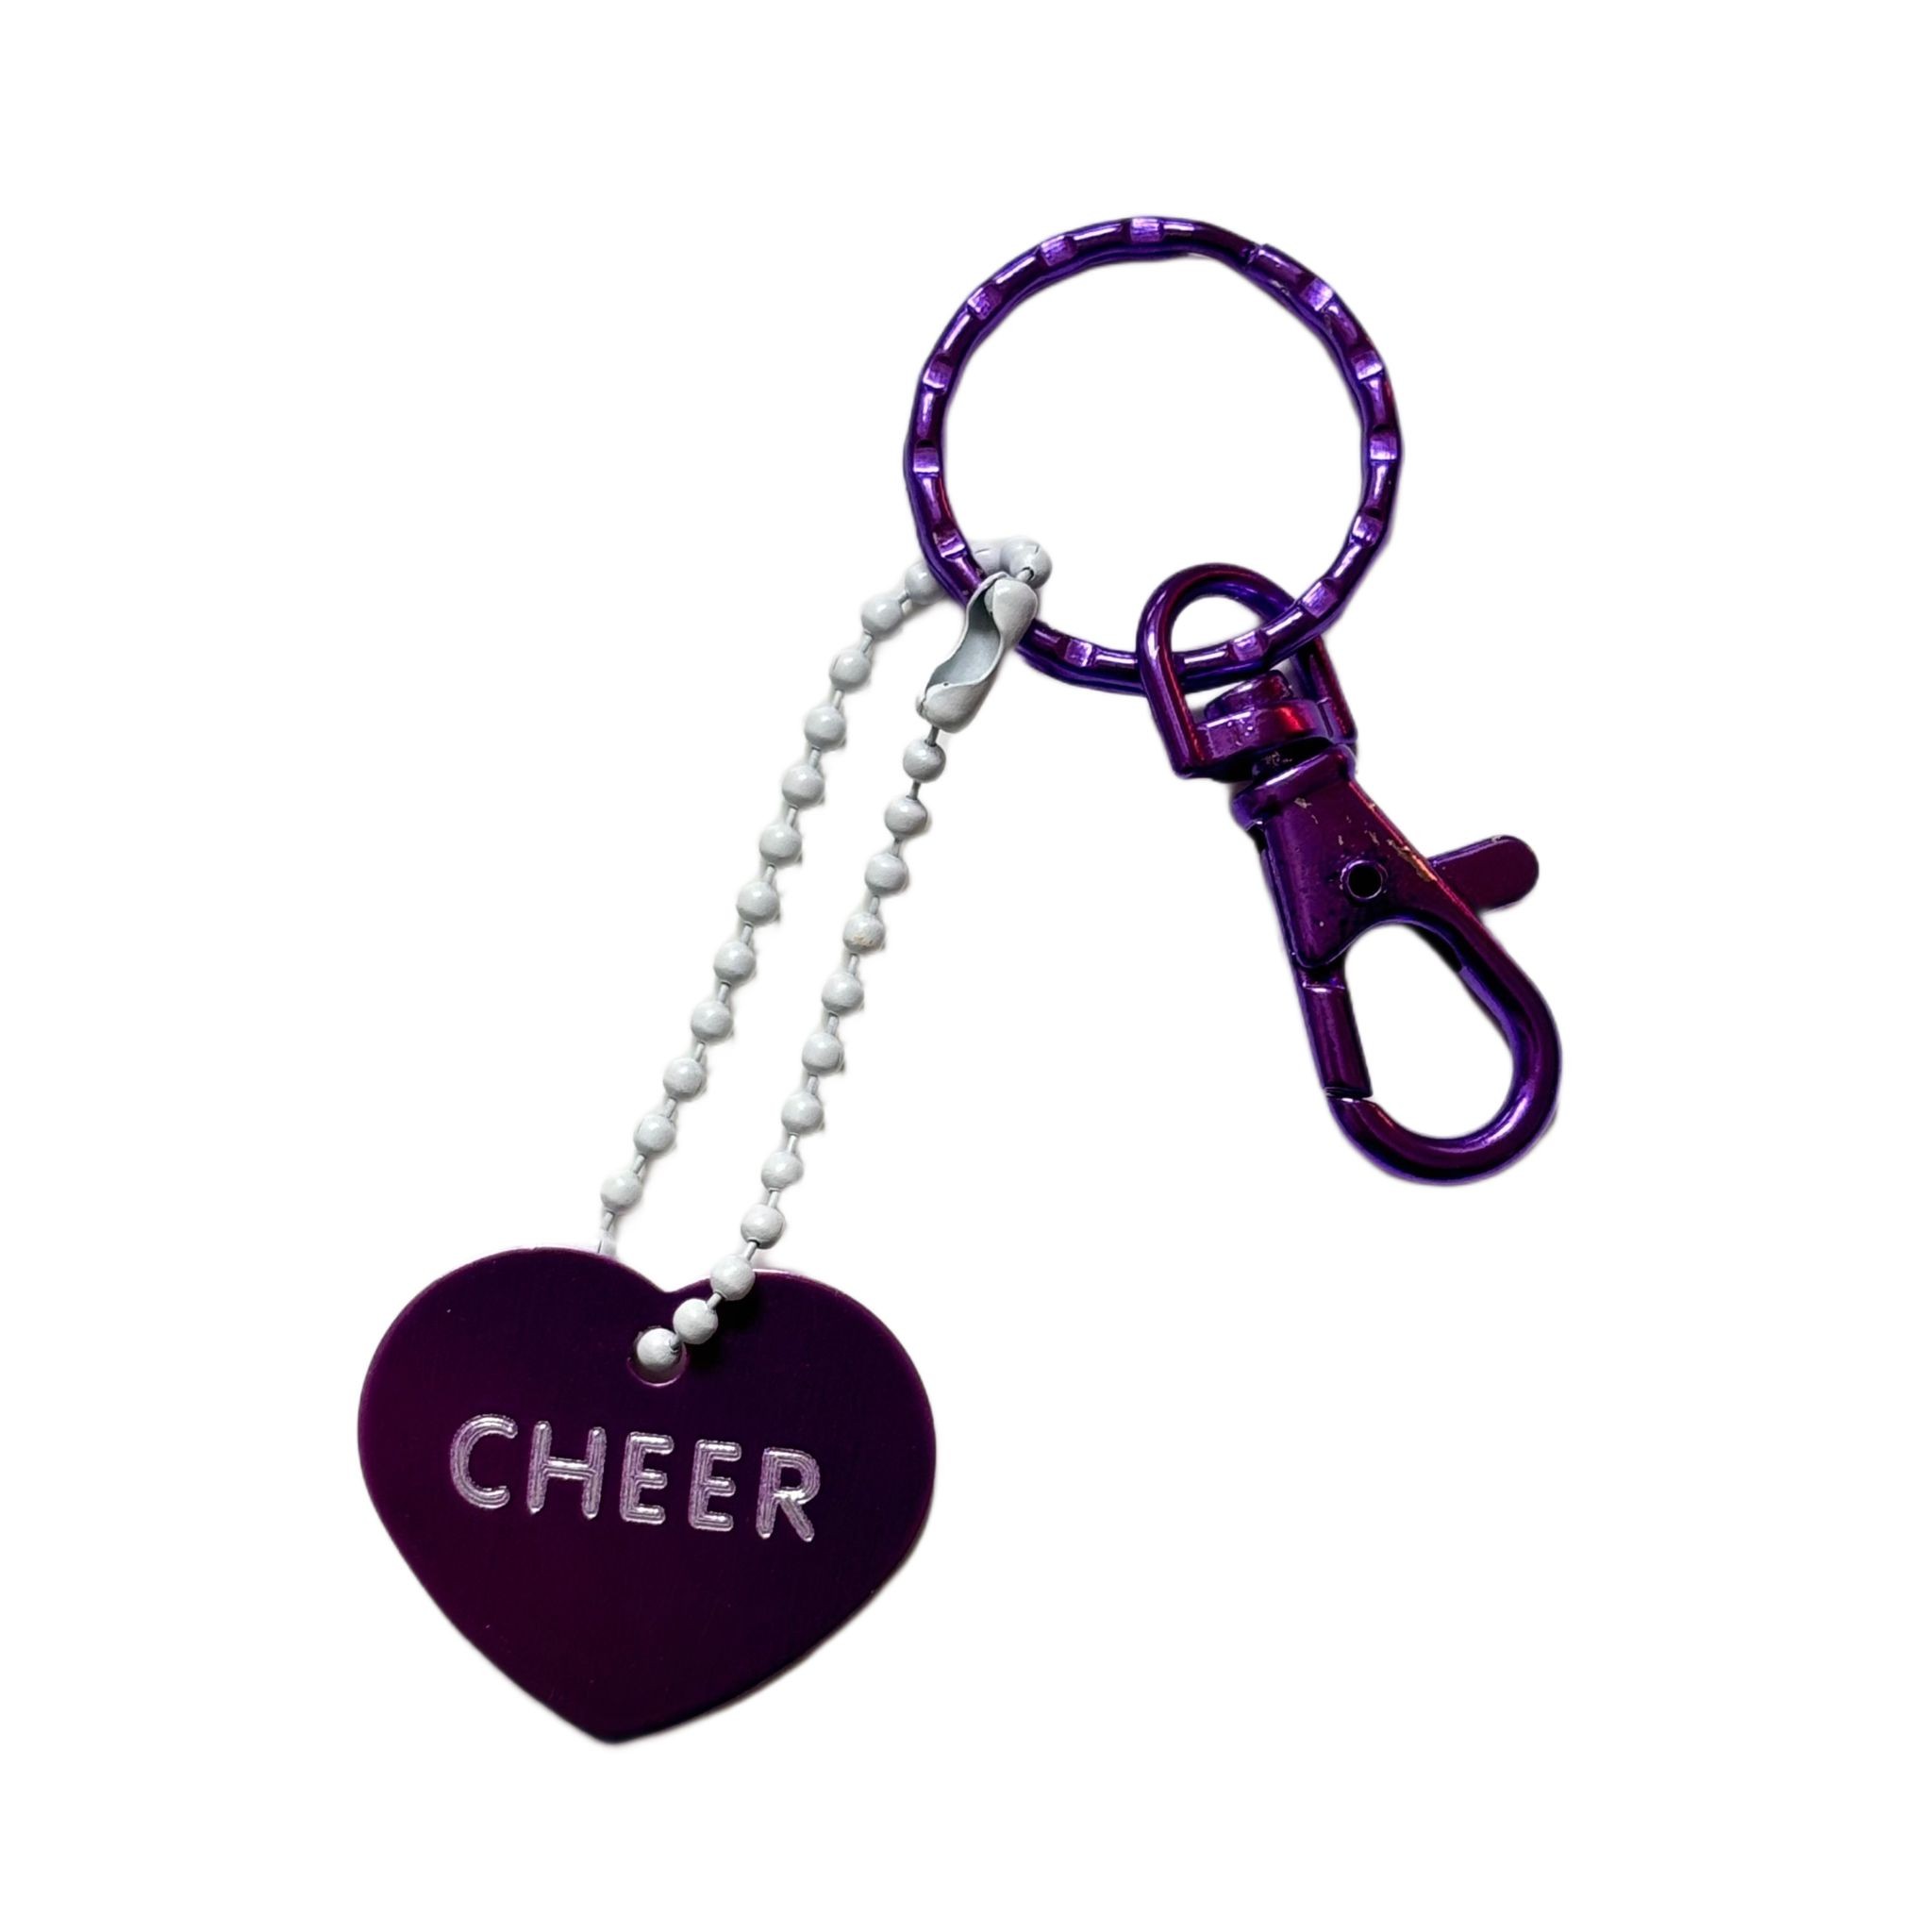 Full Color Cheer Keychain - END OF STOCK